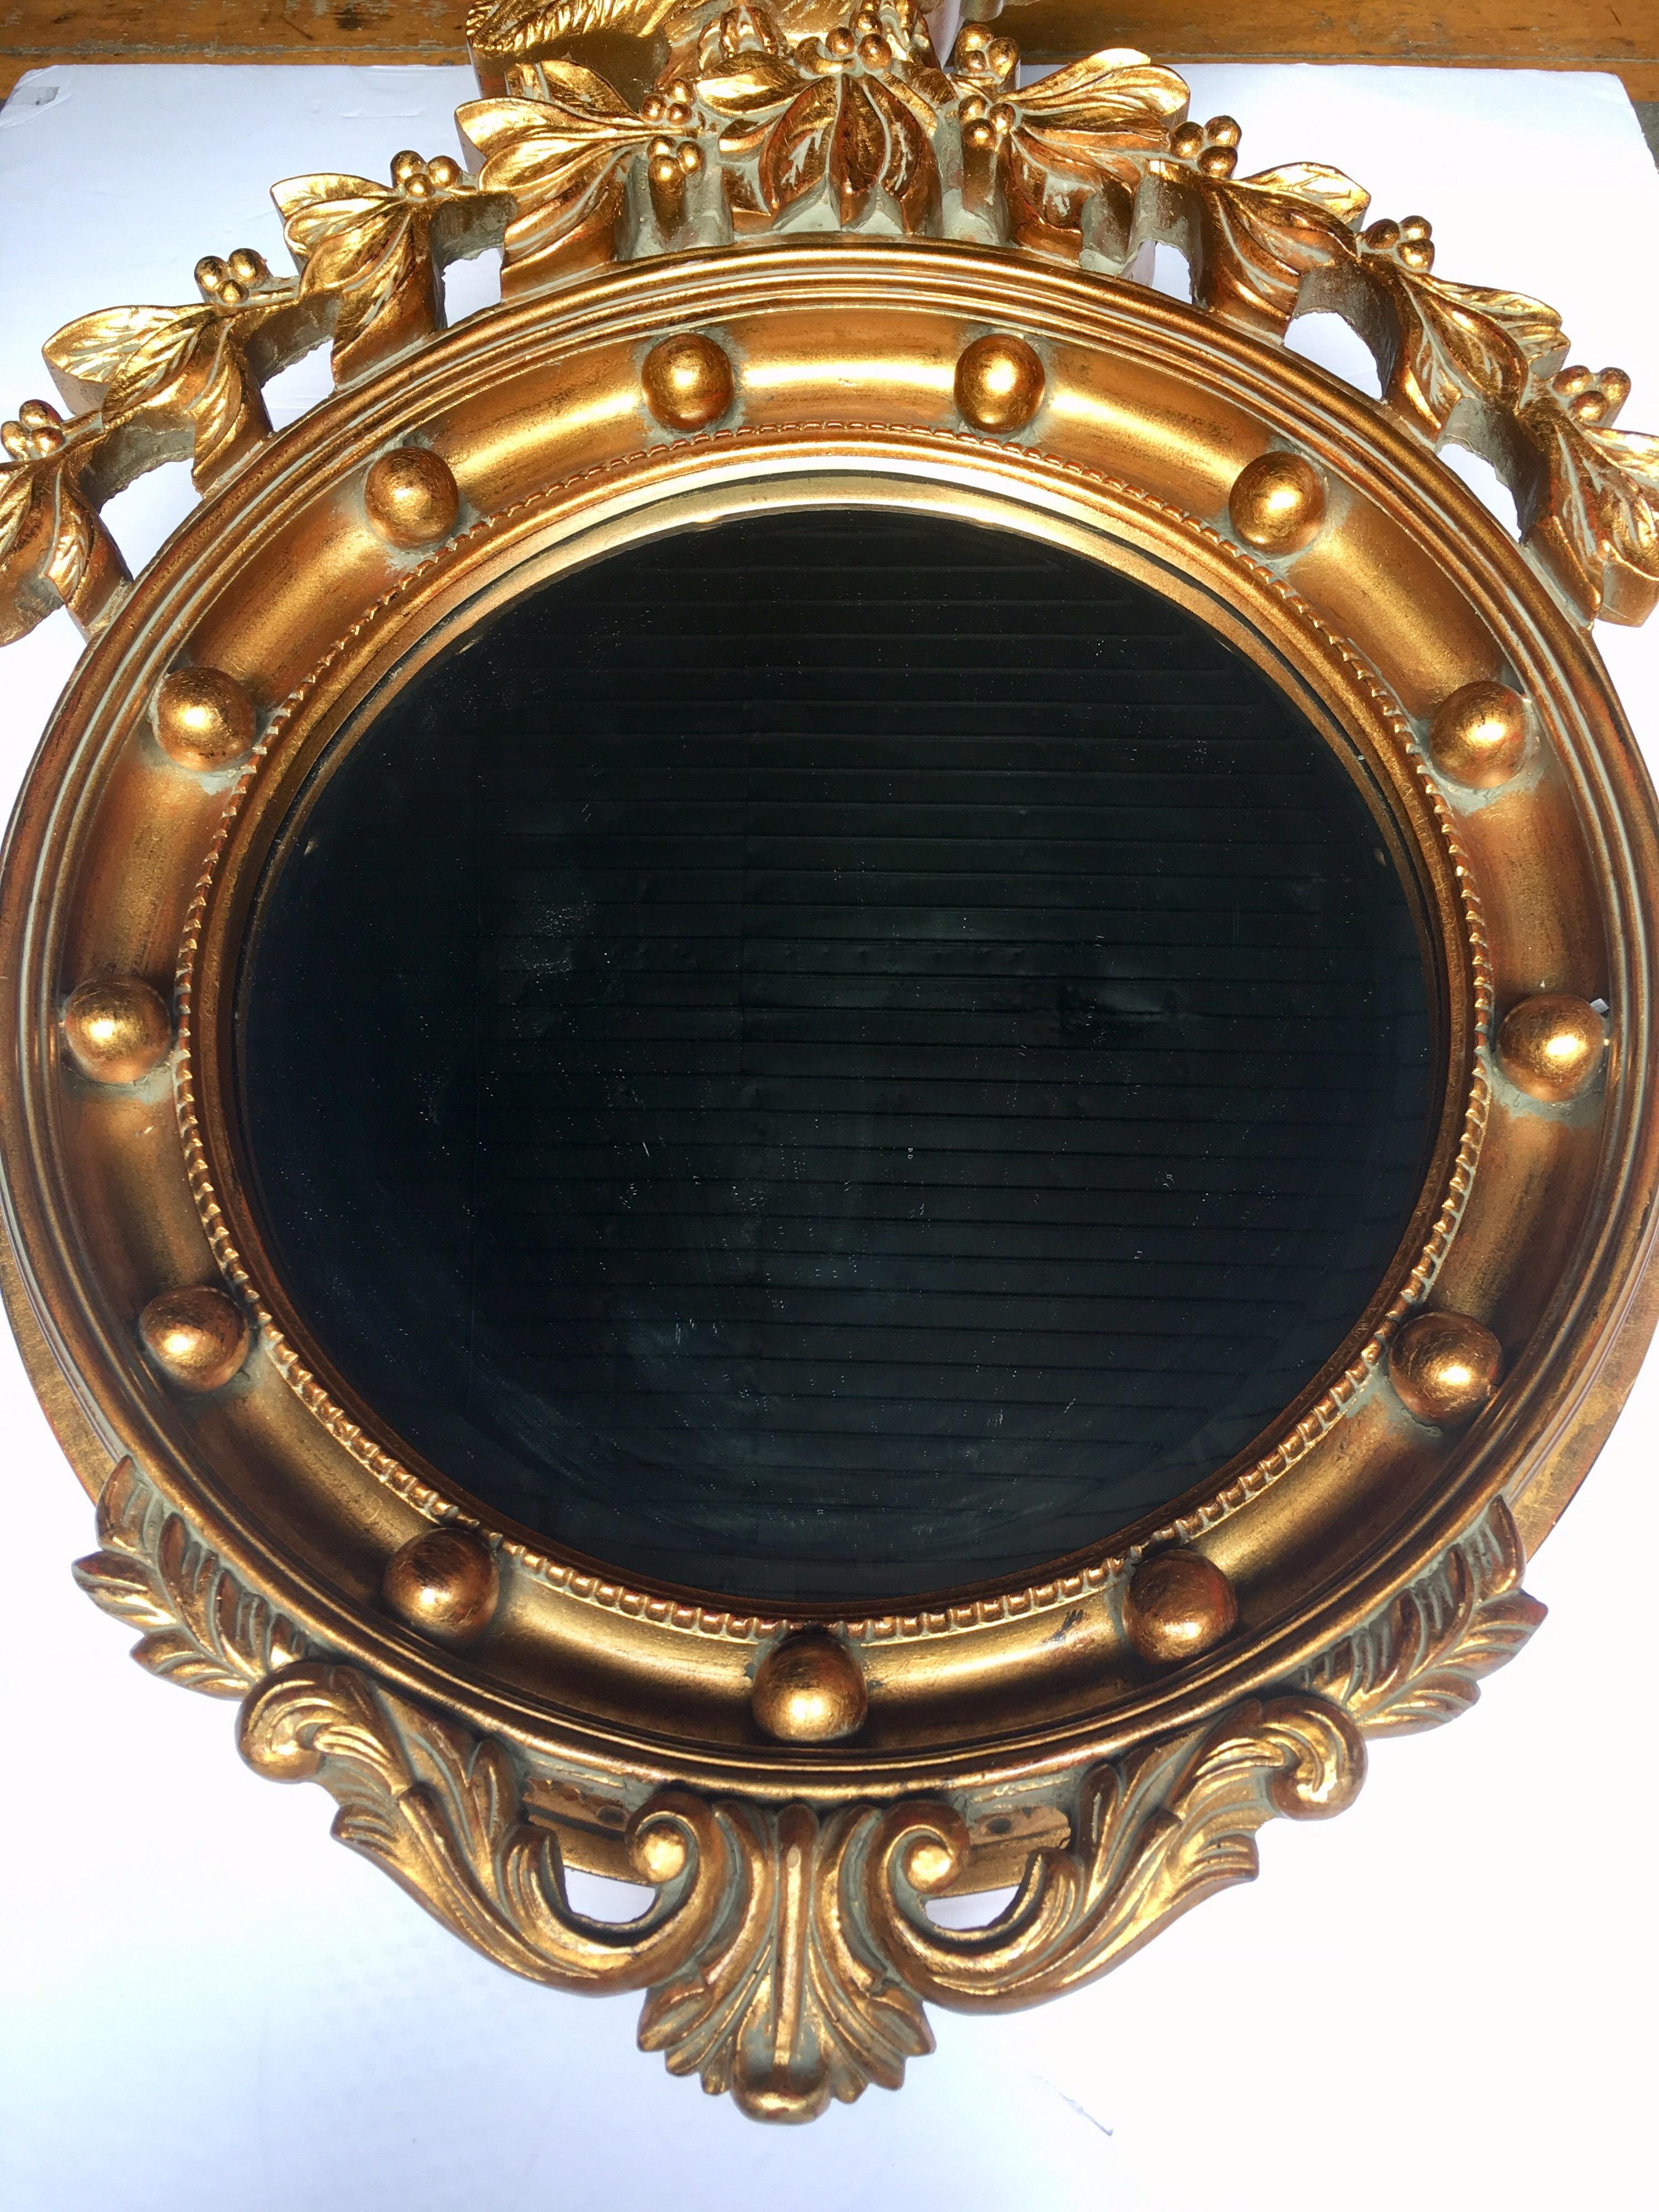 Large dimensional traditional Federal style round mirror with perched eagle flanked by acanthus surmounting. Carved-like frame is constructed of a light weight composition and is finished in a metallic gold painted finish. Beveled mirror measures 16